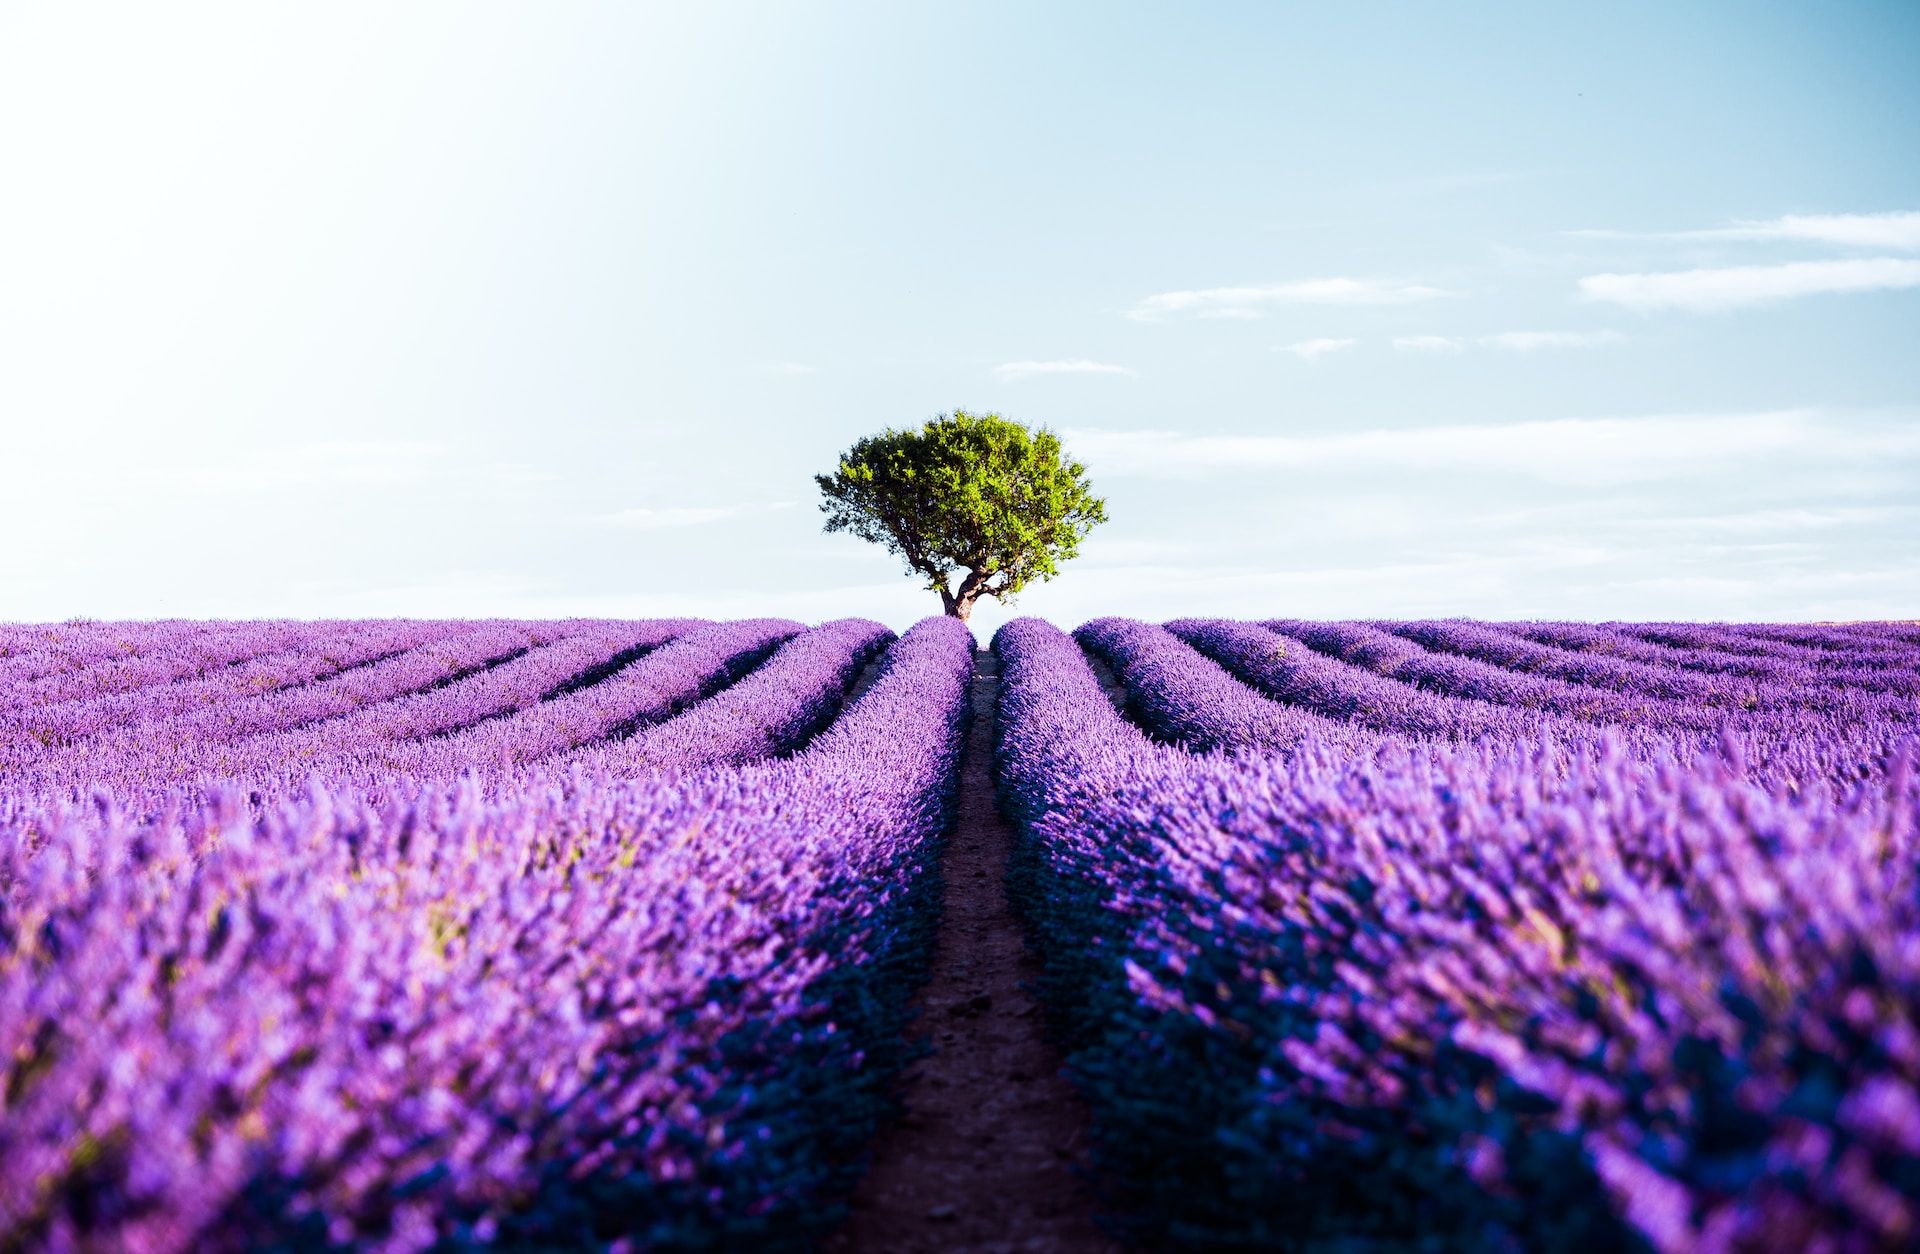 Lavender field with a single tree in the back